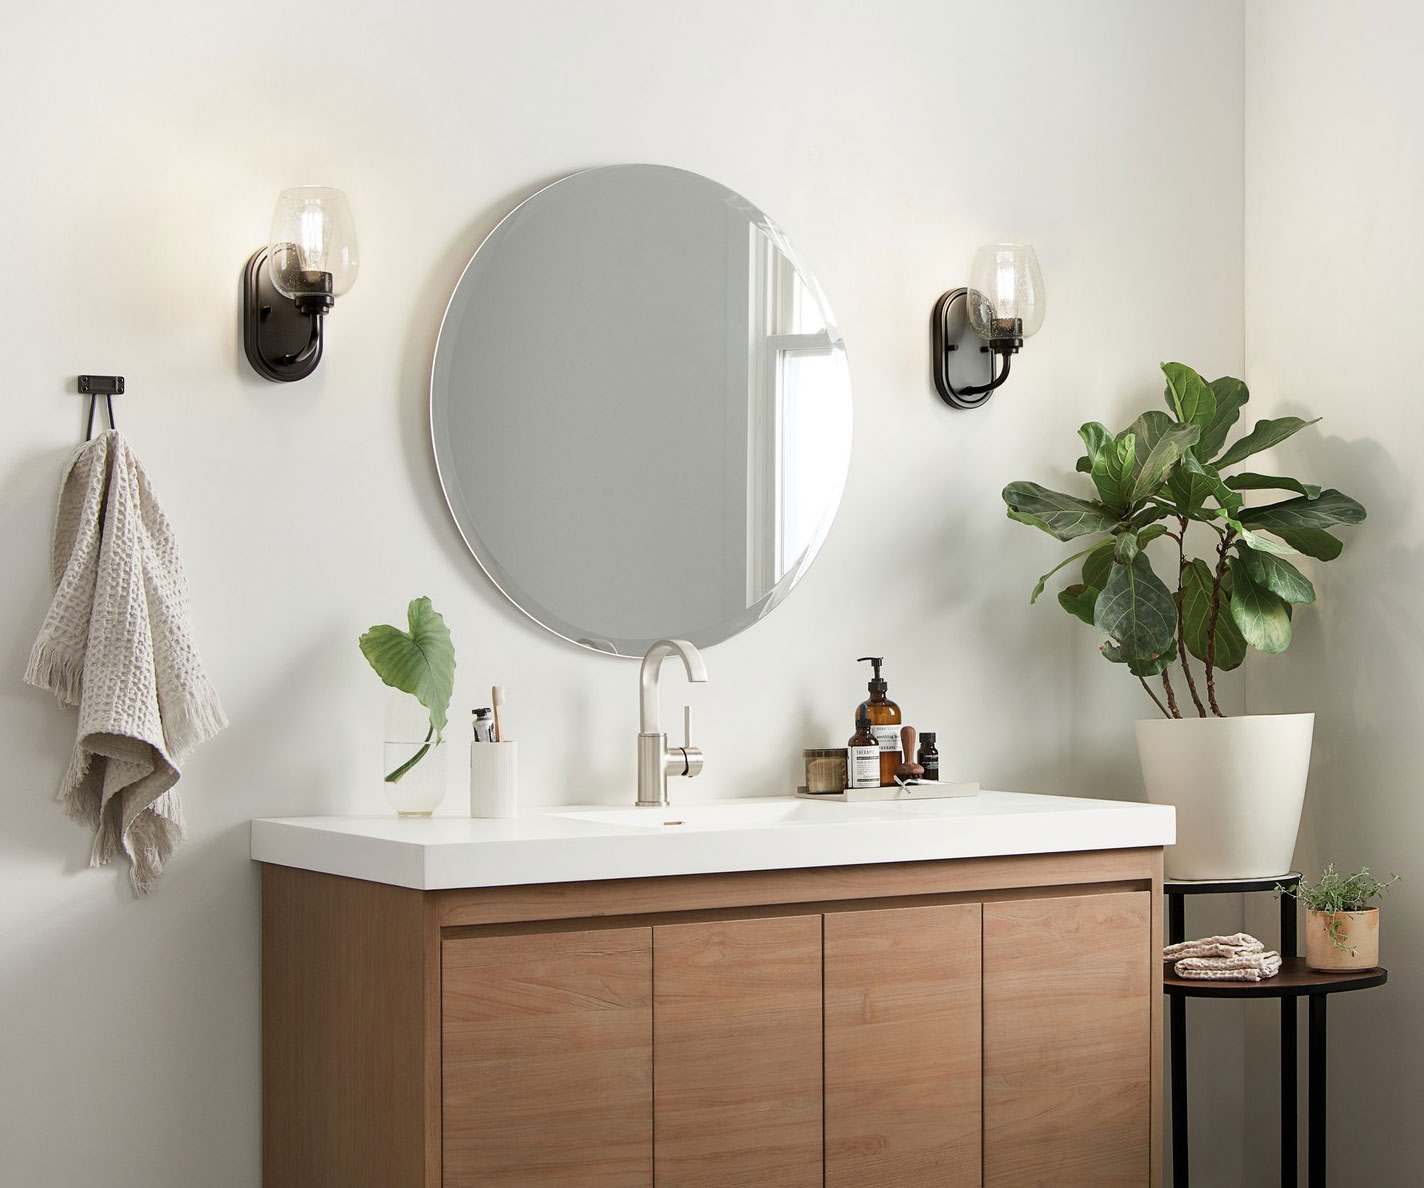 Bathroom with wall-mounted vanity lights on either side of the mirror